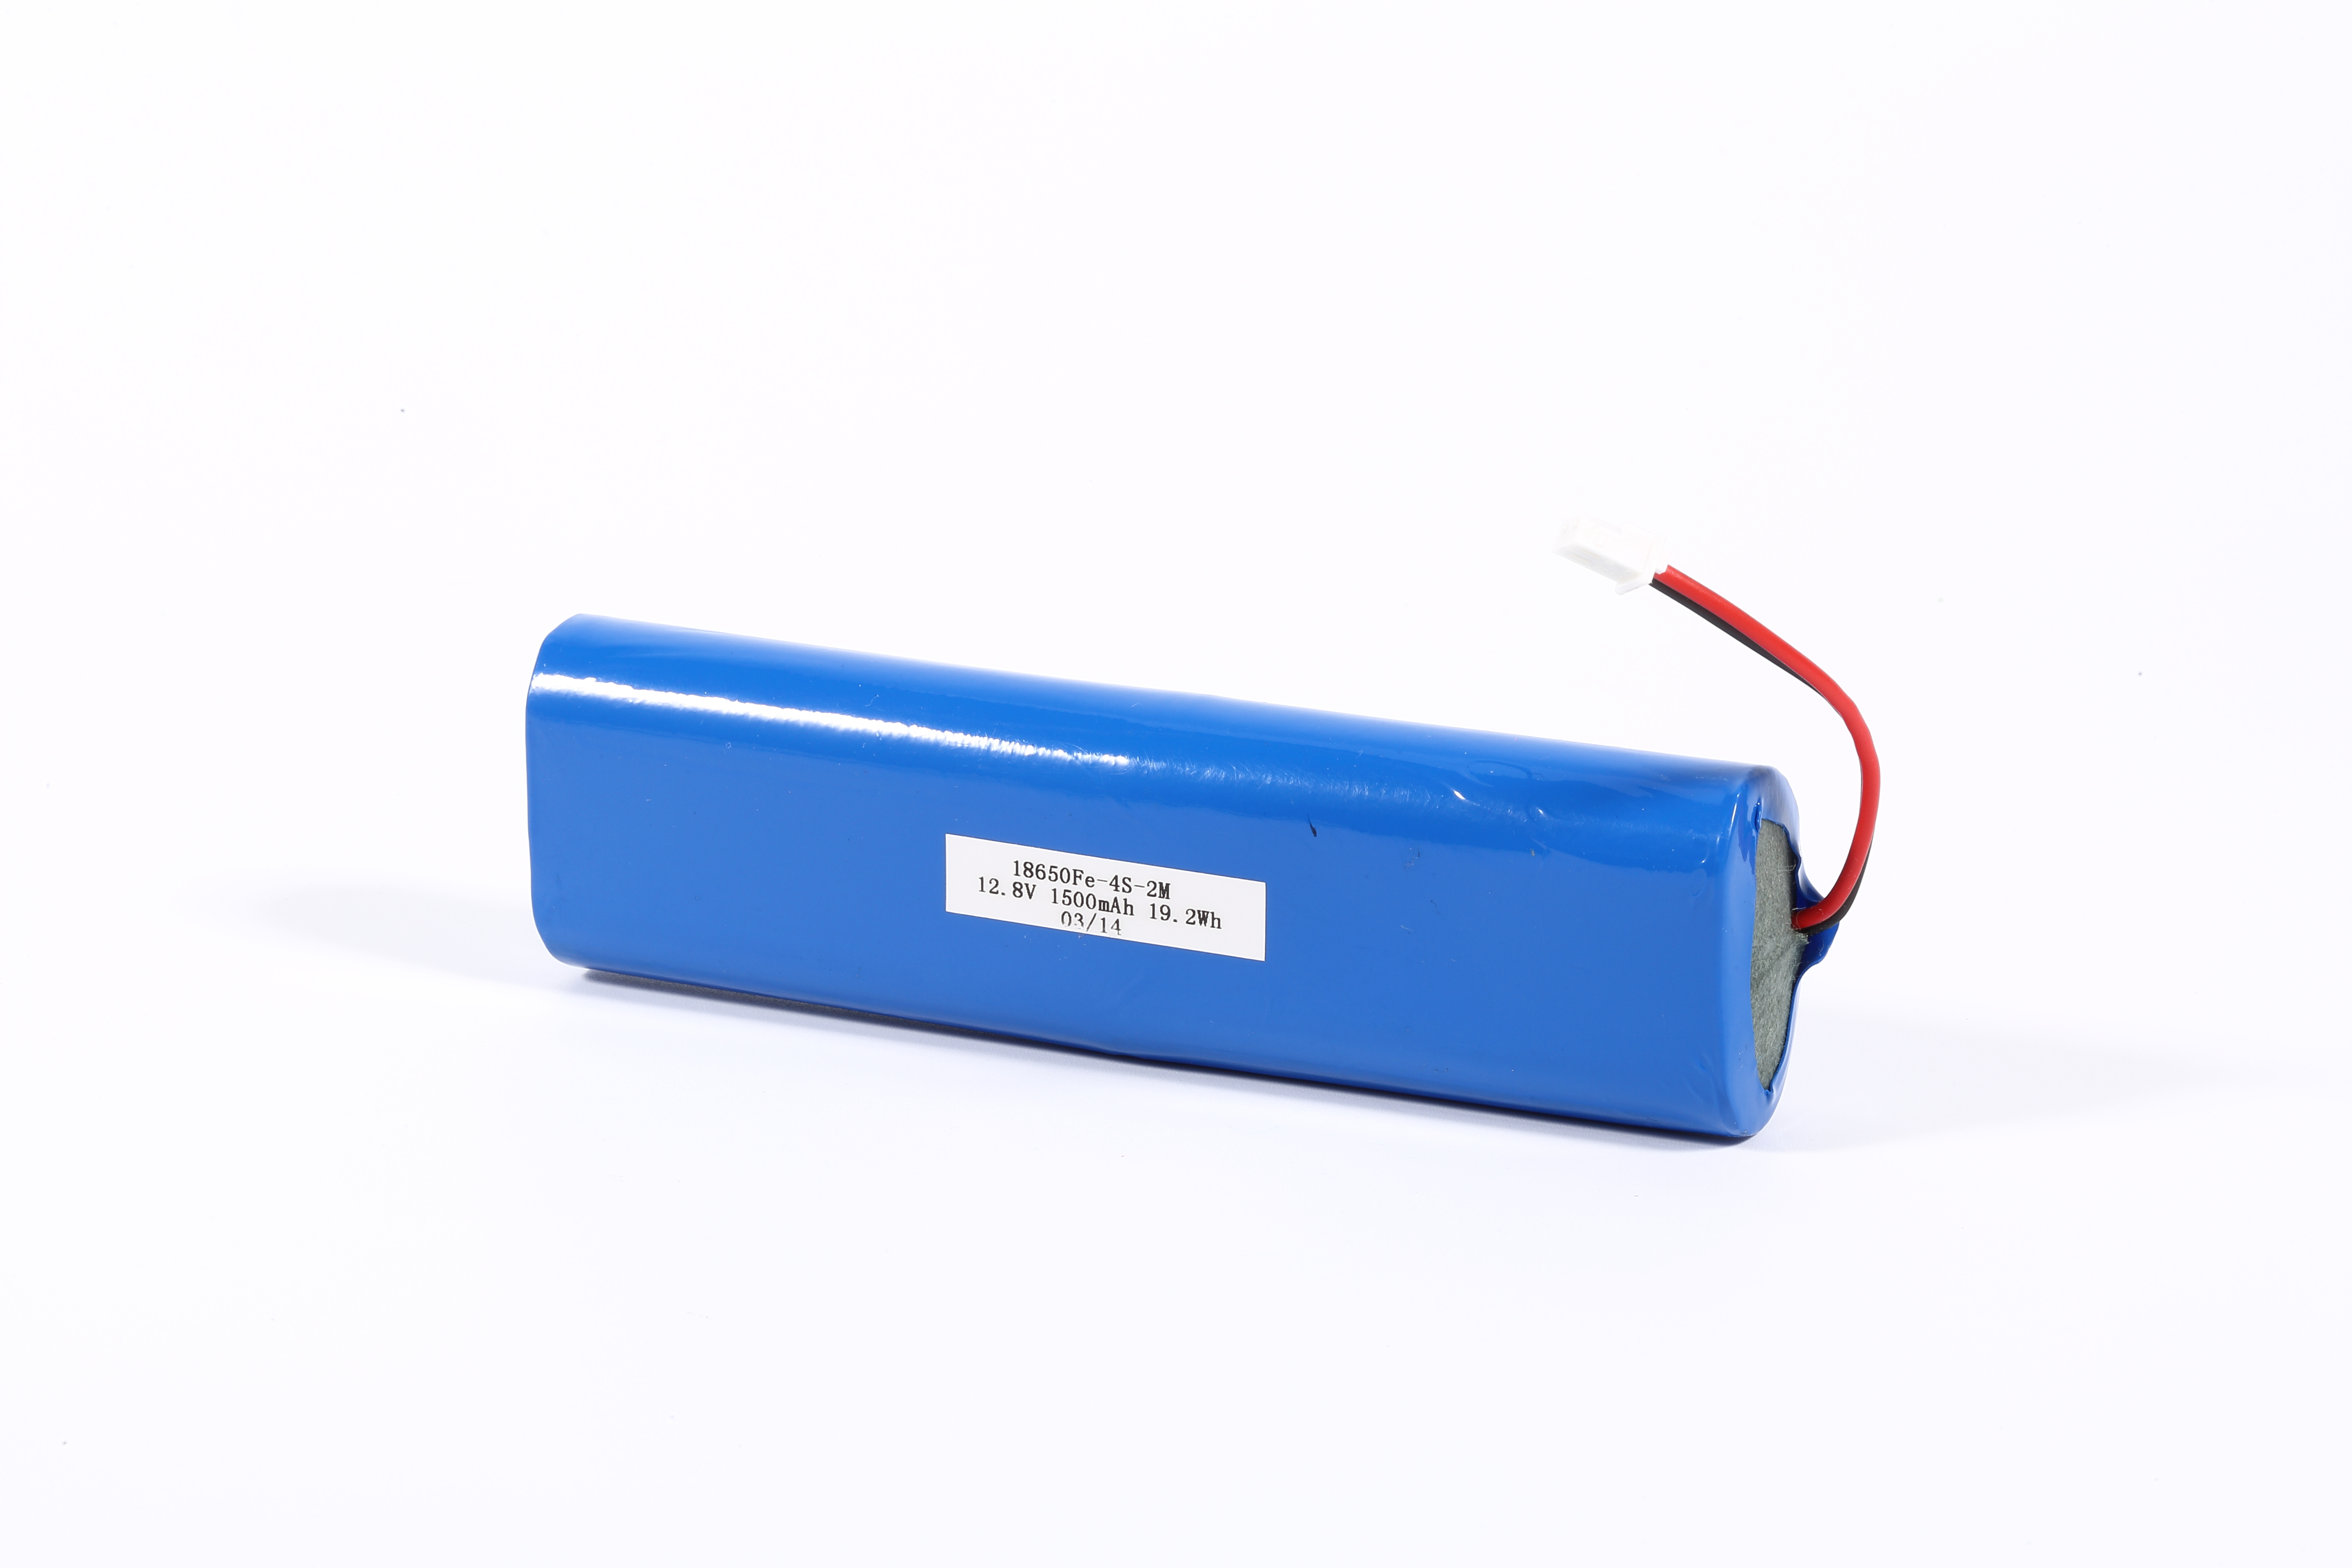 14430 55ah LiFePO4 battery cell for electric cars